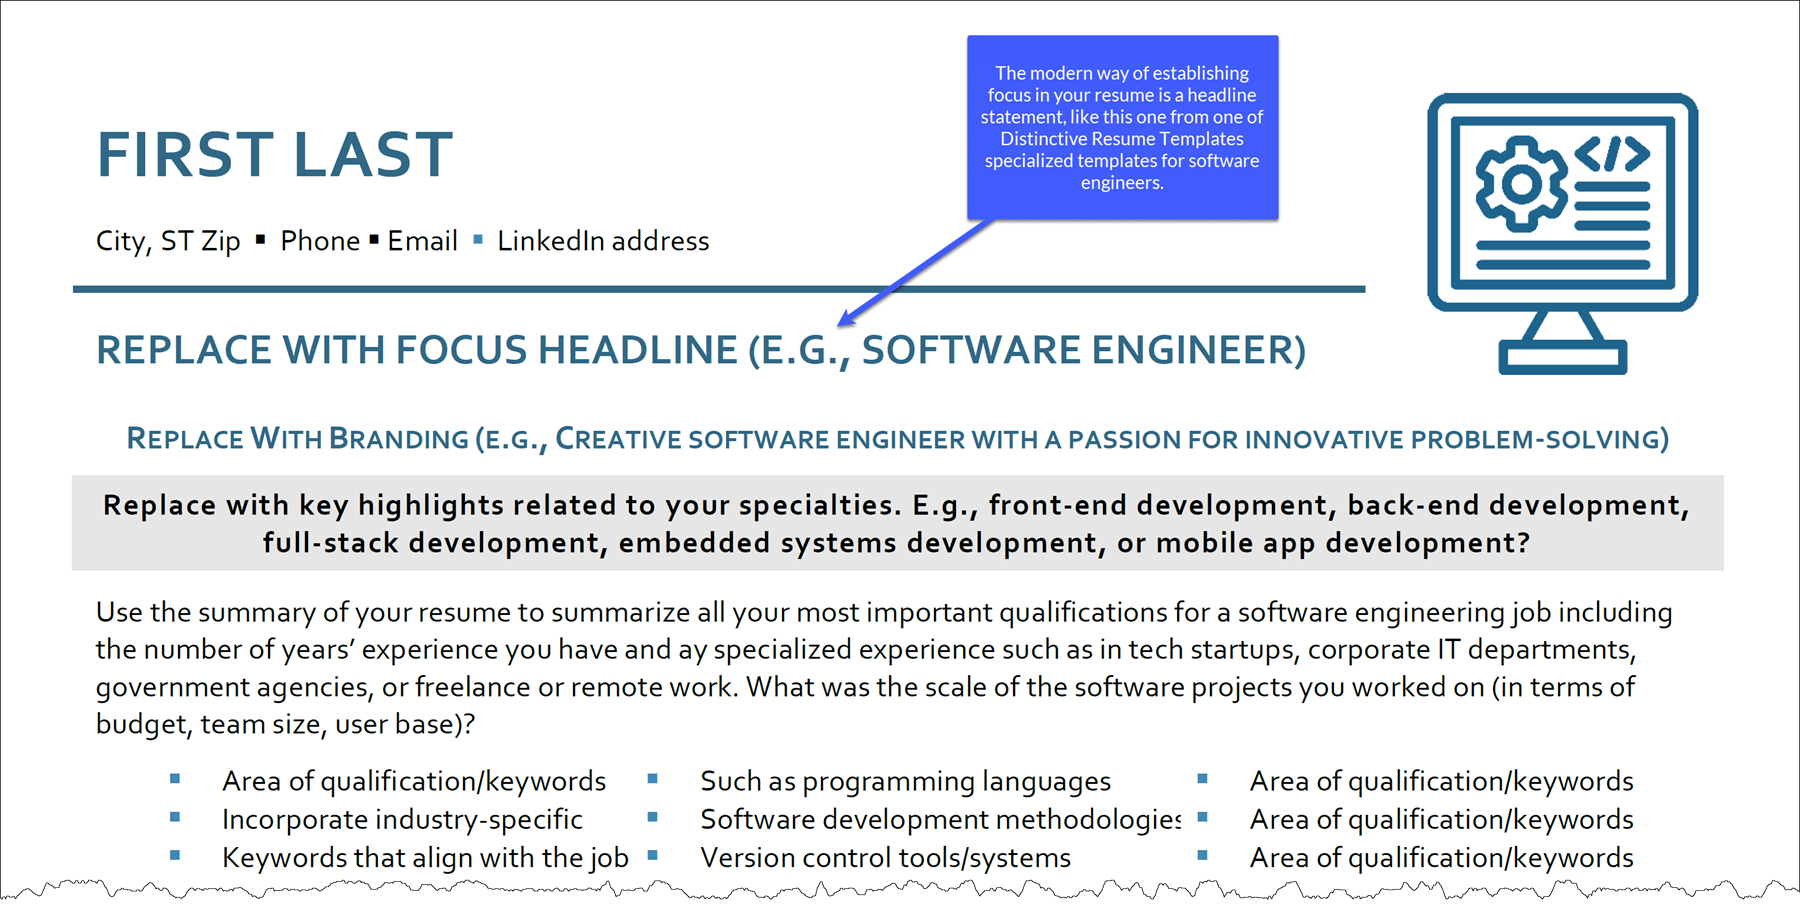 resume template with headline statement for focus